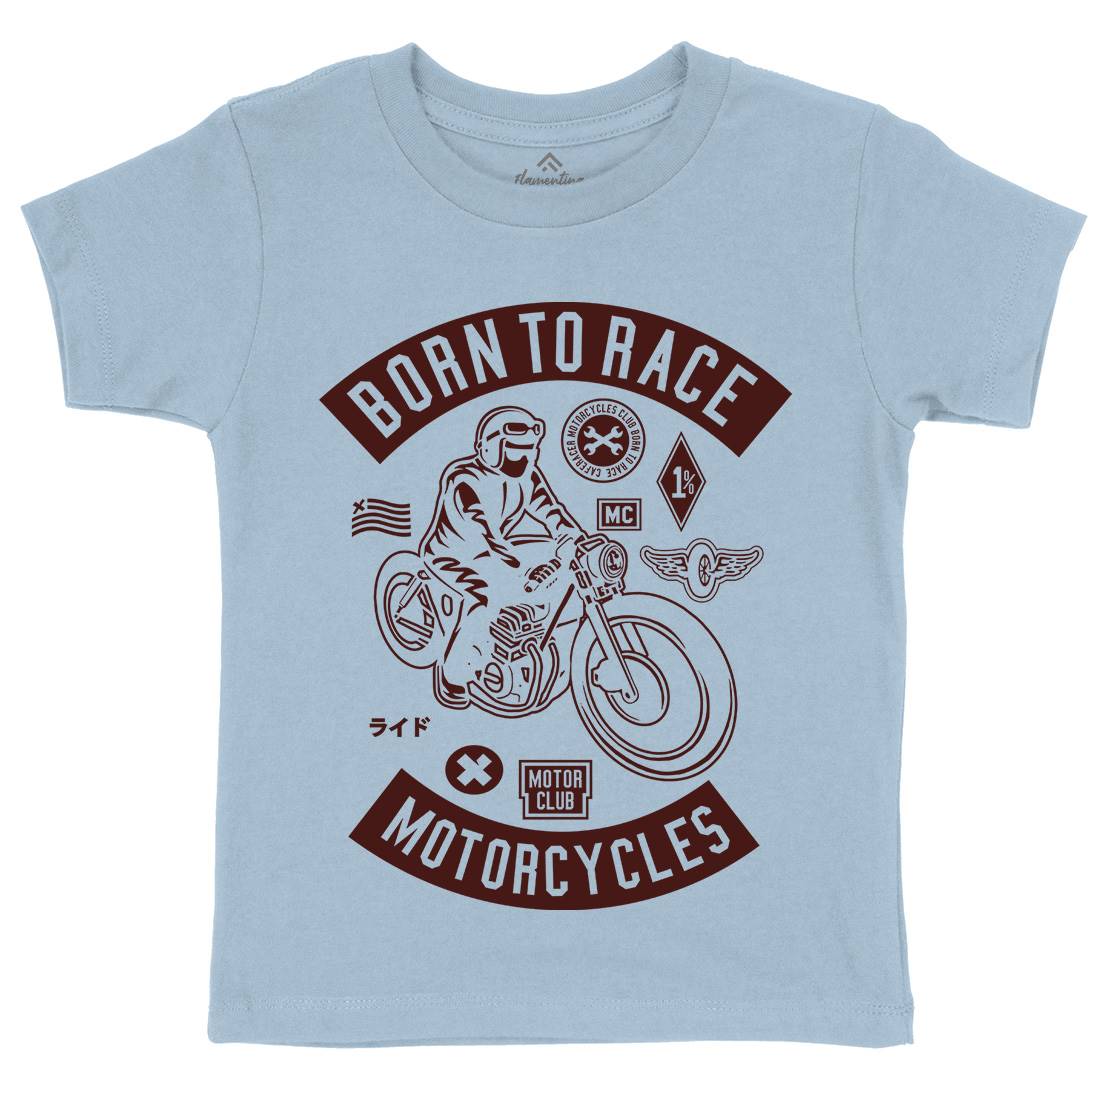 Born To Race Kids Crew Neck T-Shirt Motorcycles A210